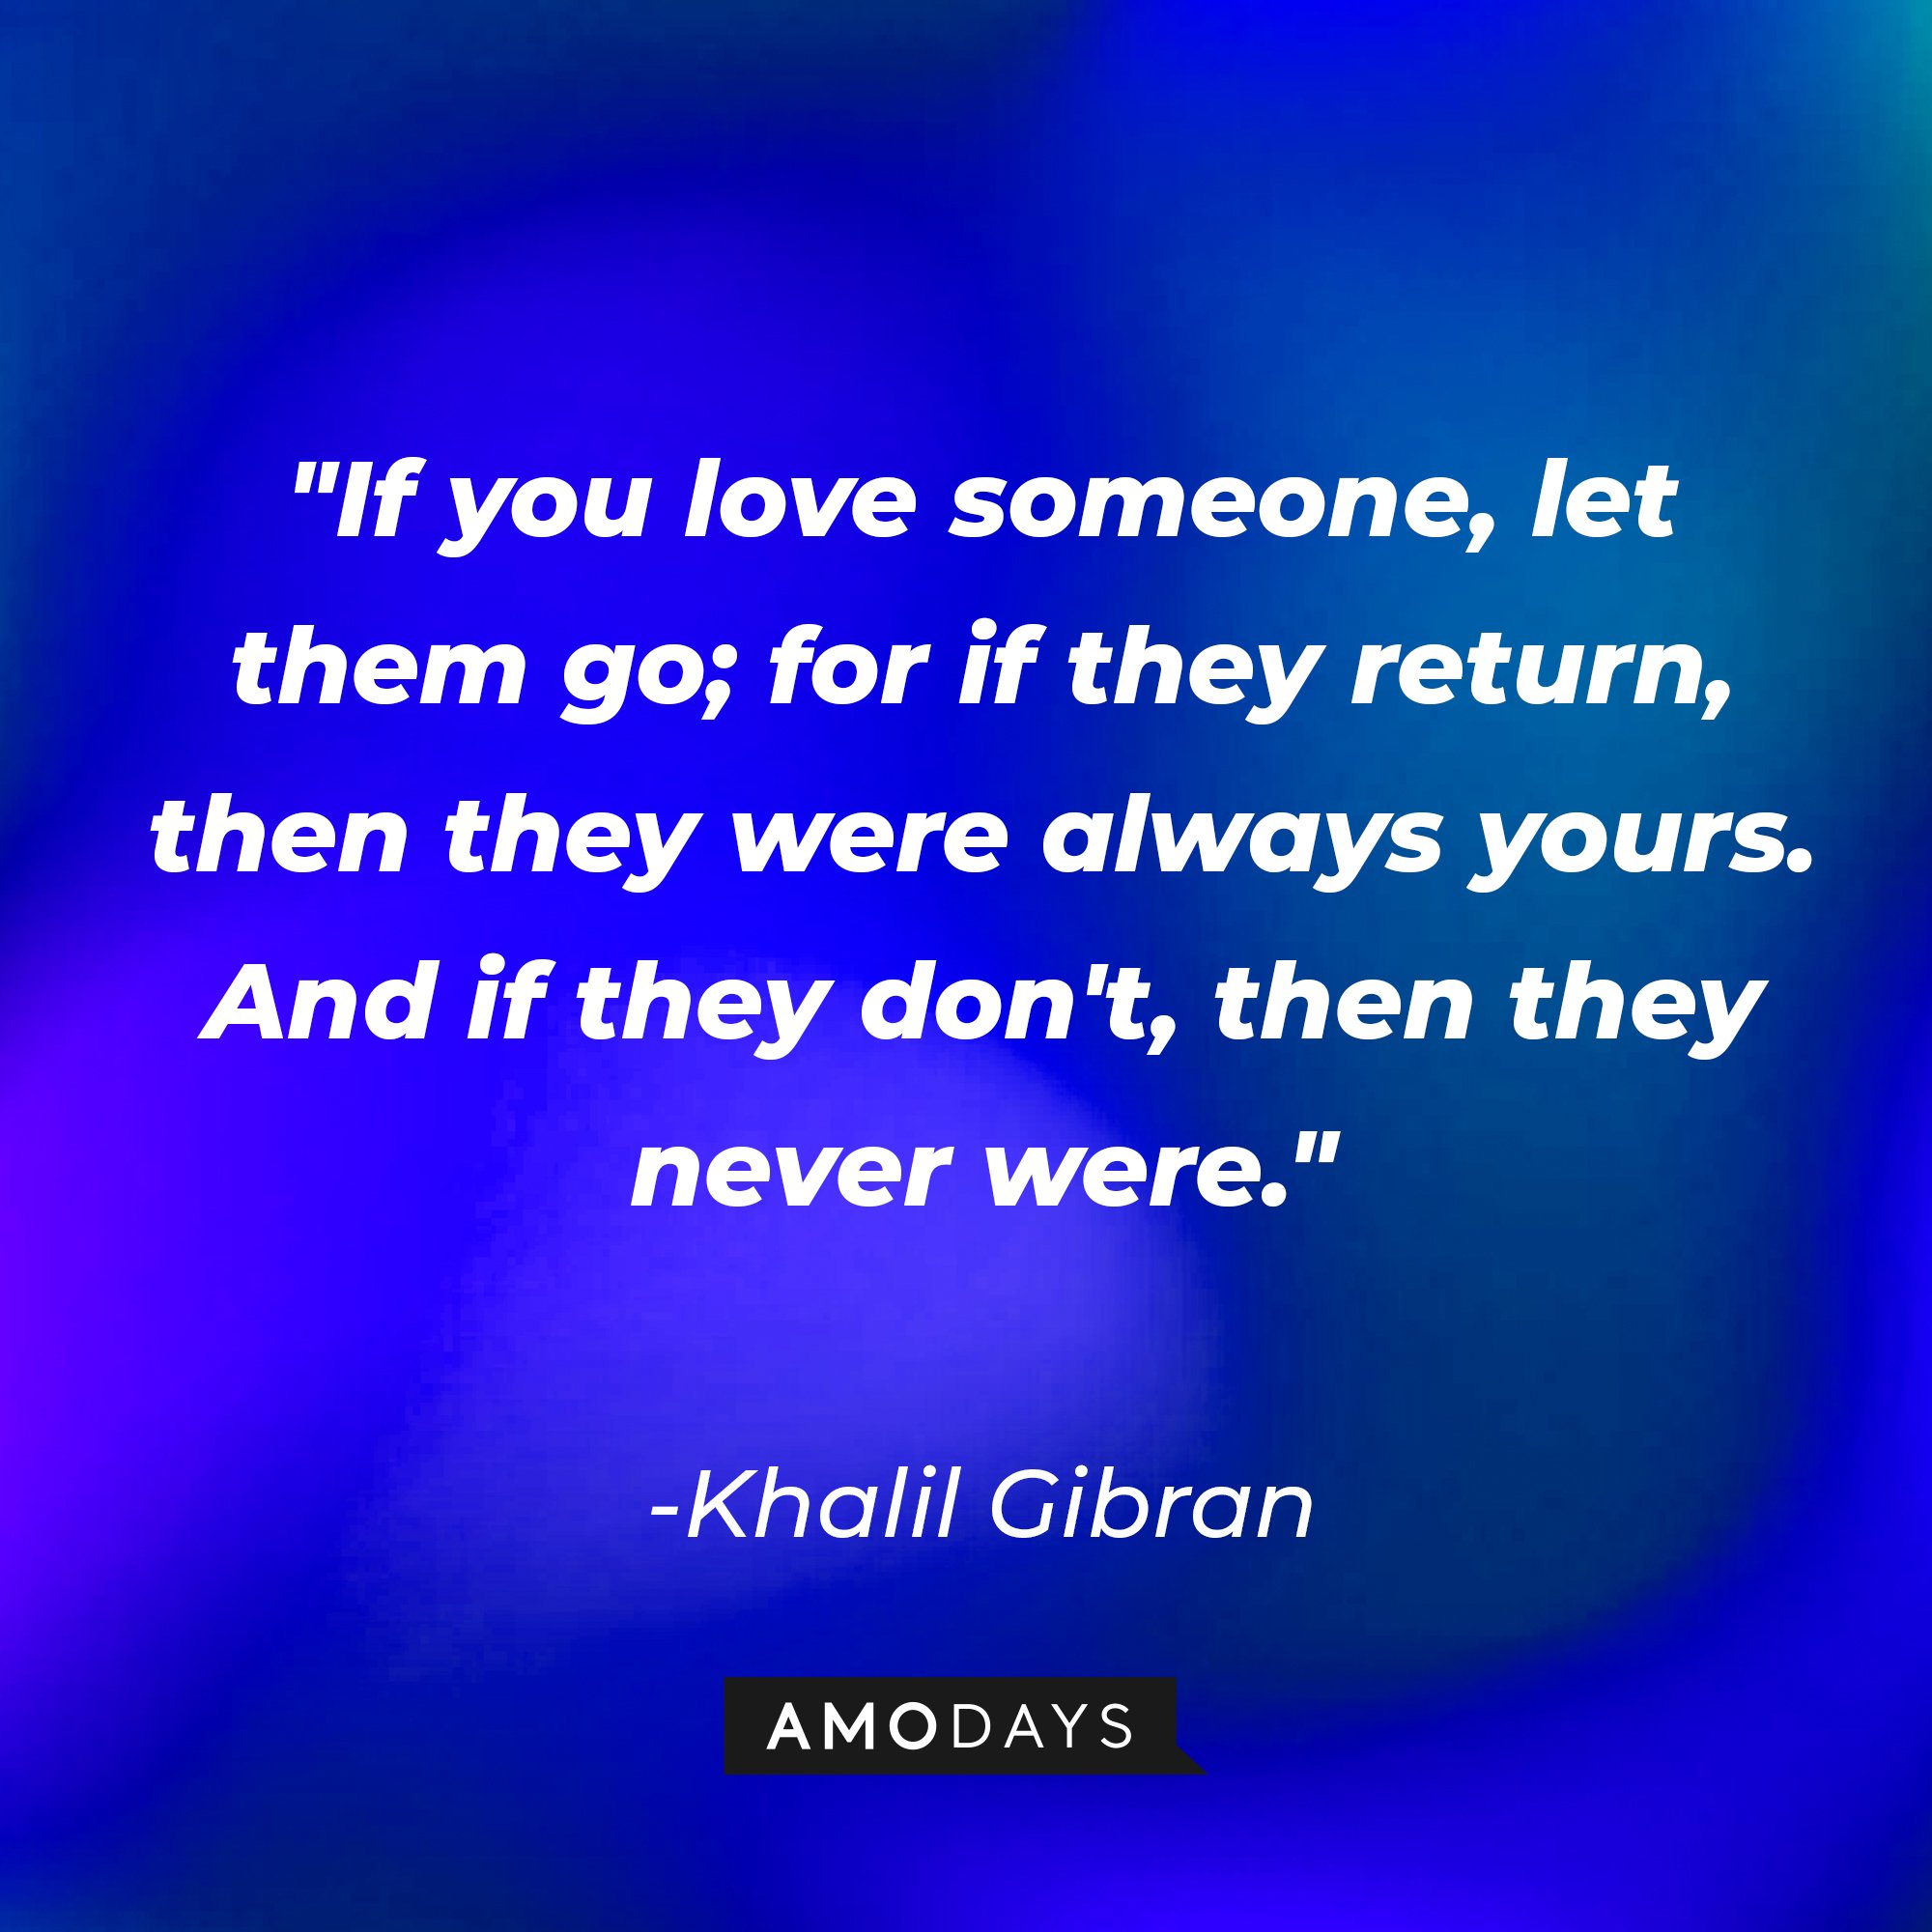 Khalil Gibran’s quote: "If you love someone, let them go; for if they return, then they were always yours. And if they don't, then they never were." | Image: AmoDays